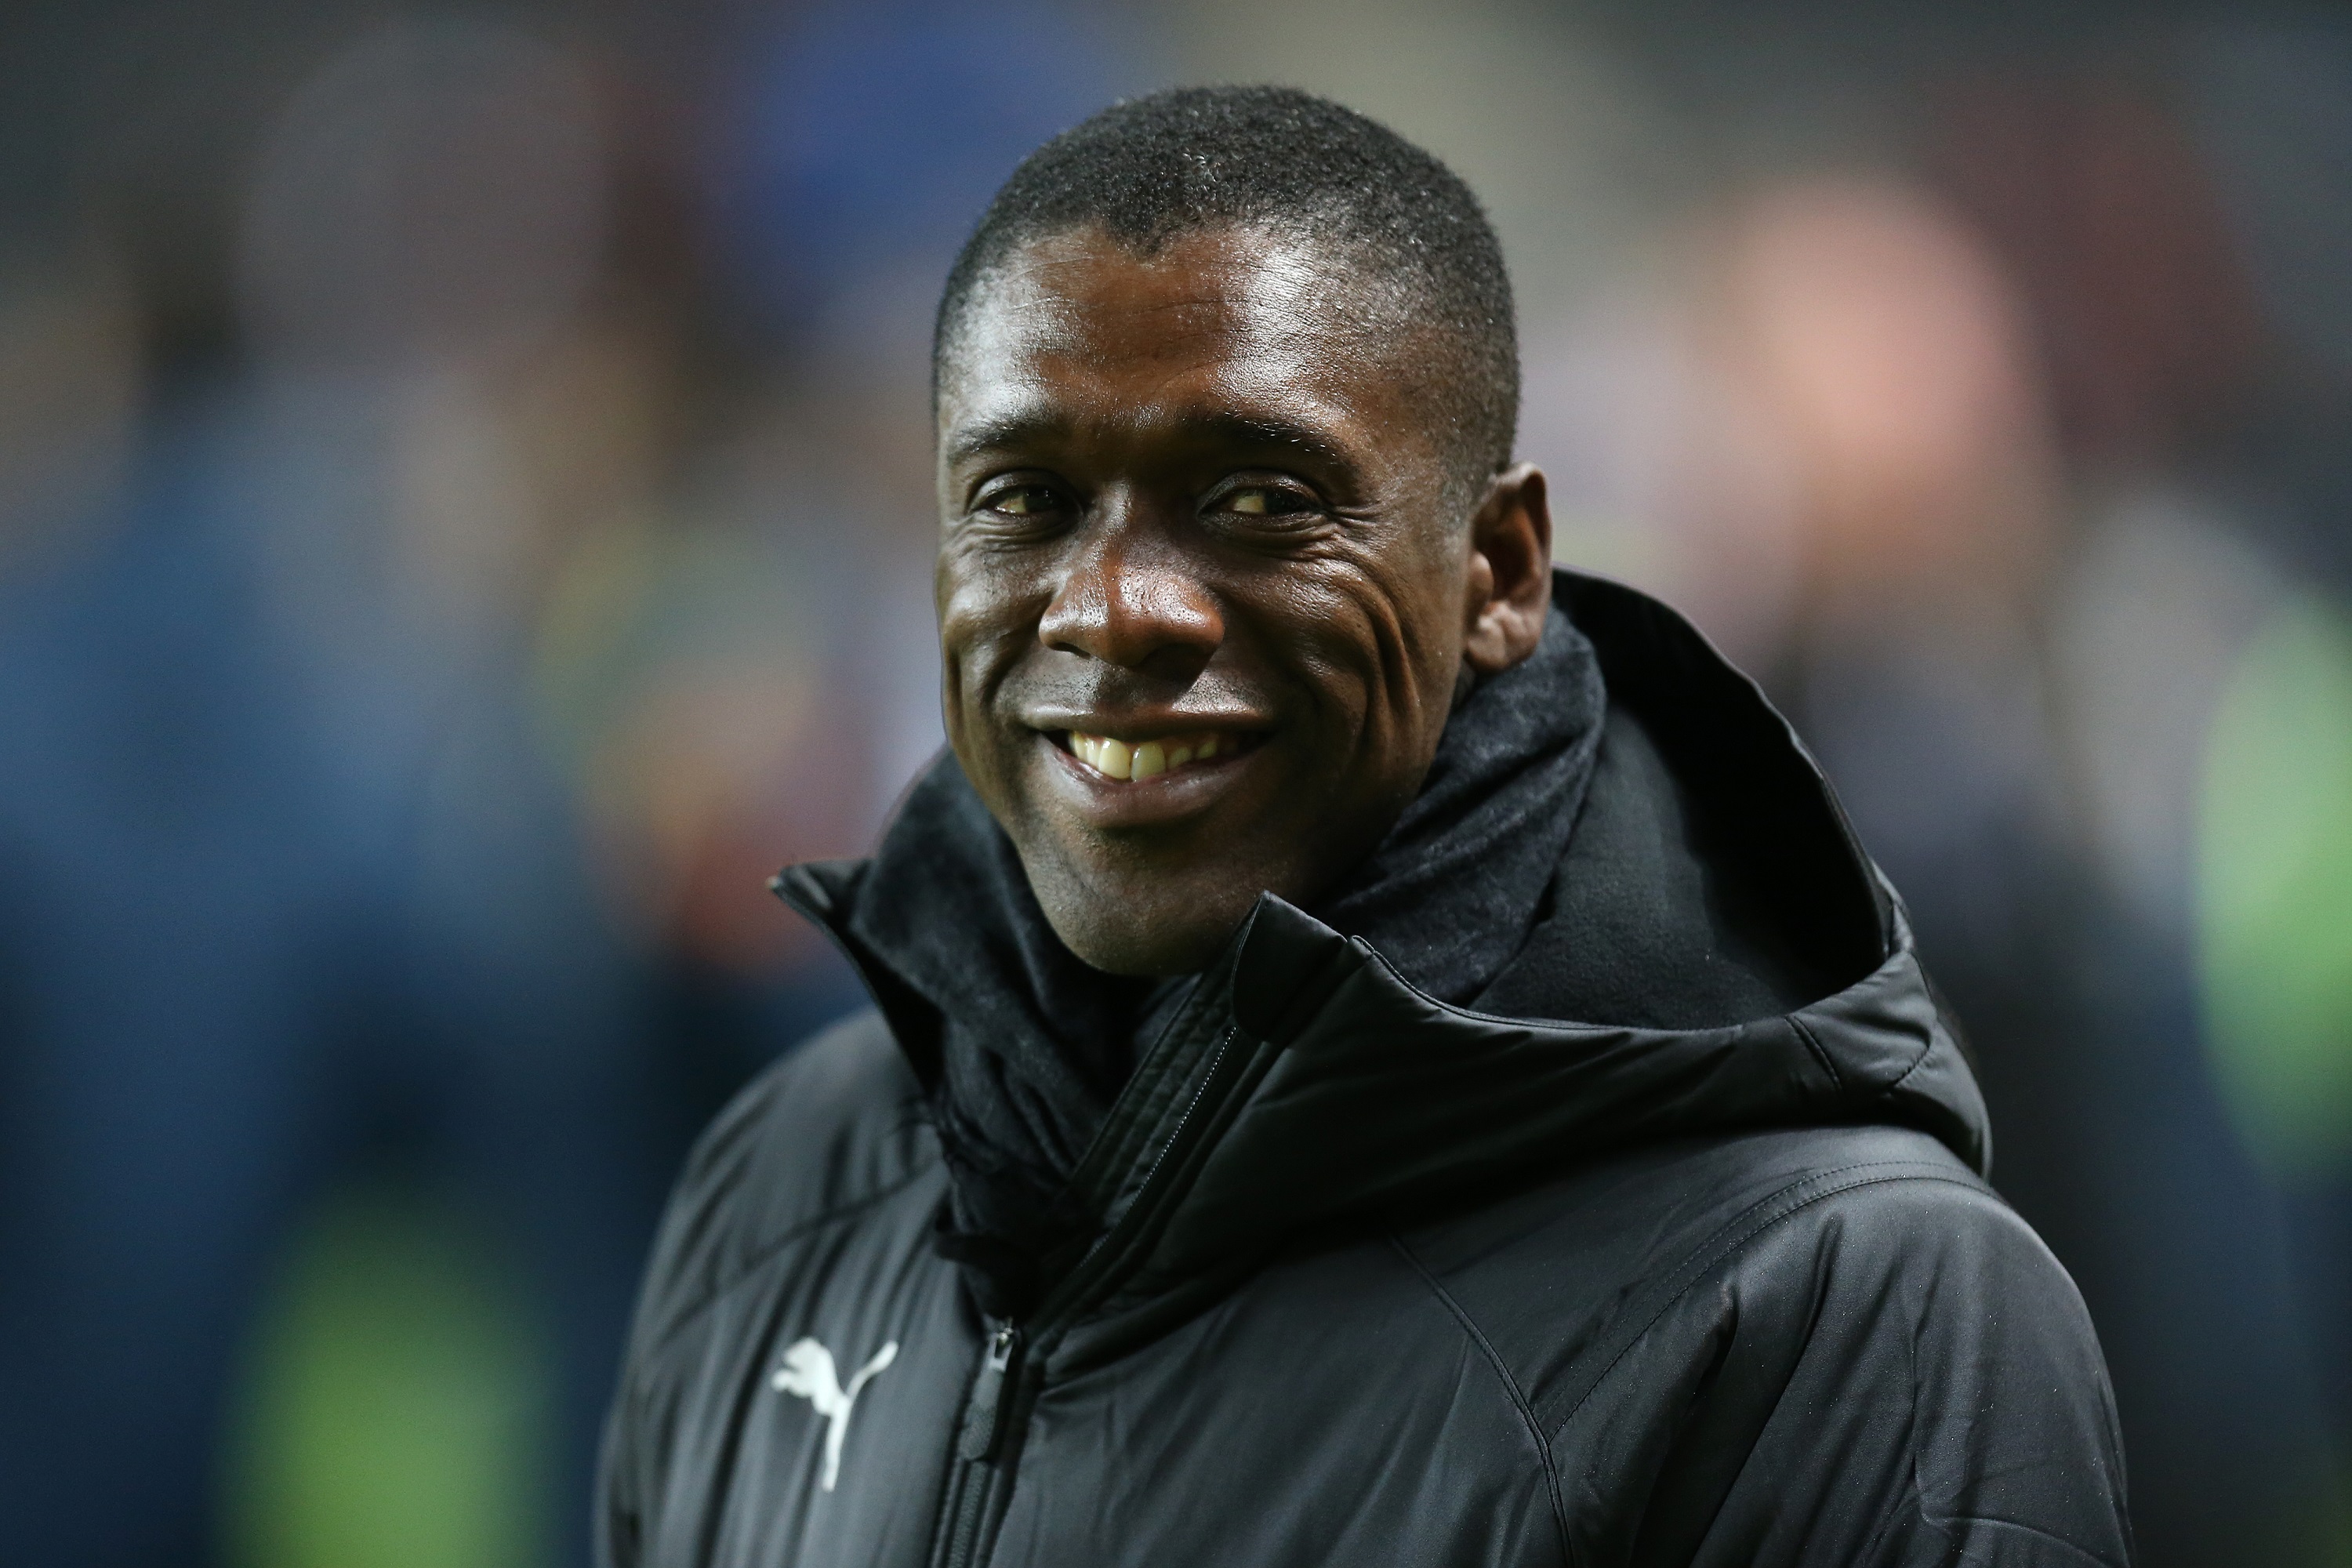 MILTON KEYNES, ENGLAND - NOVEMBER 20:  Cameroon  head coach Clarence Seedorf  looks on prior to the International Friendly match between Brazil and Cameroon at Stadium mk on November 20, 2018 in Milton Keynes, England. (Photo by Pete Norton/Getty Images)